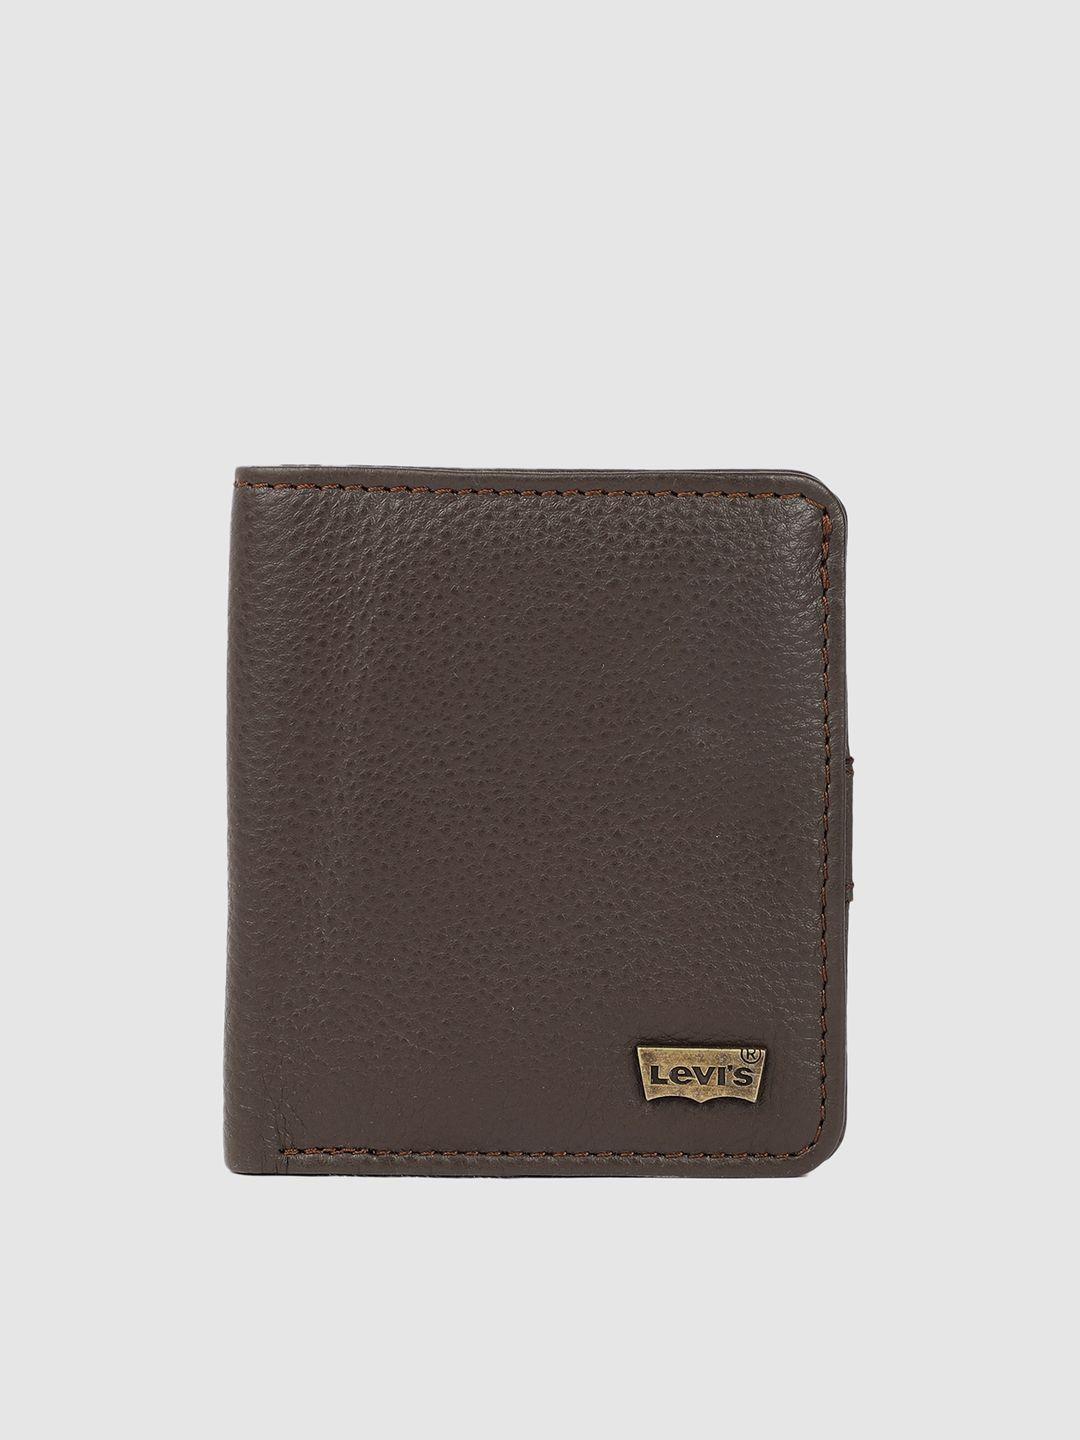 levis-men-brown-leather-two-fold-wallet